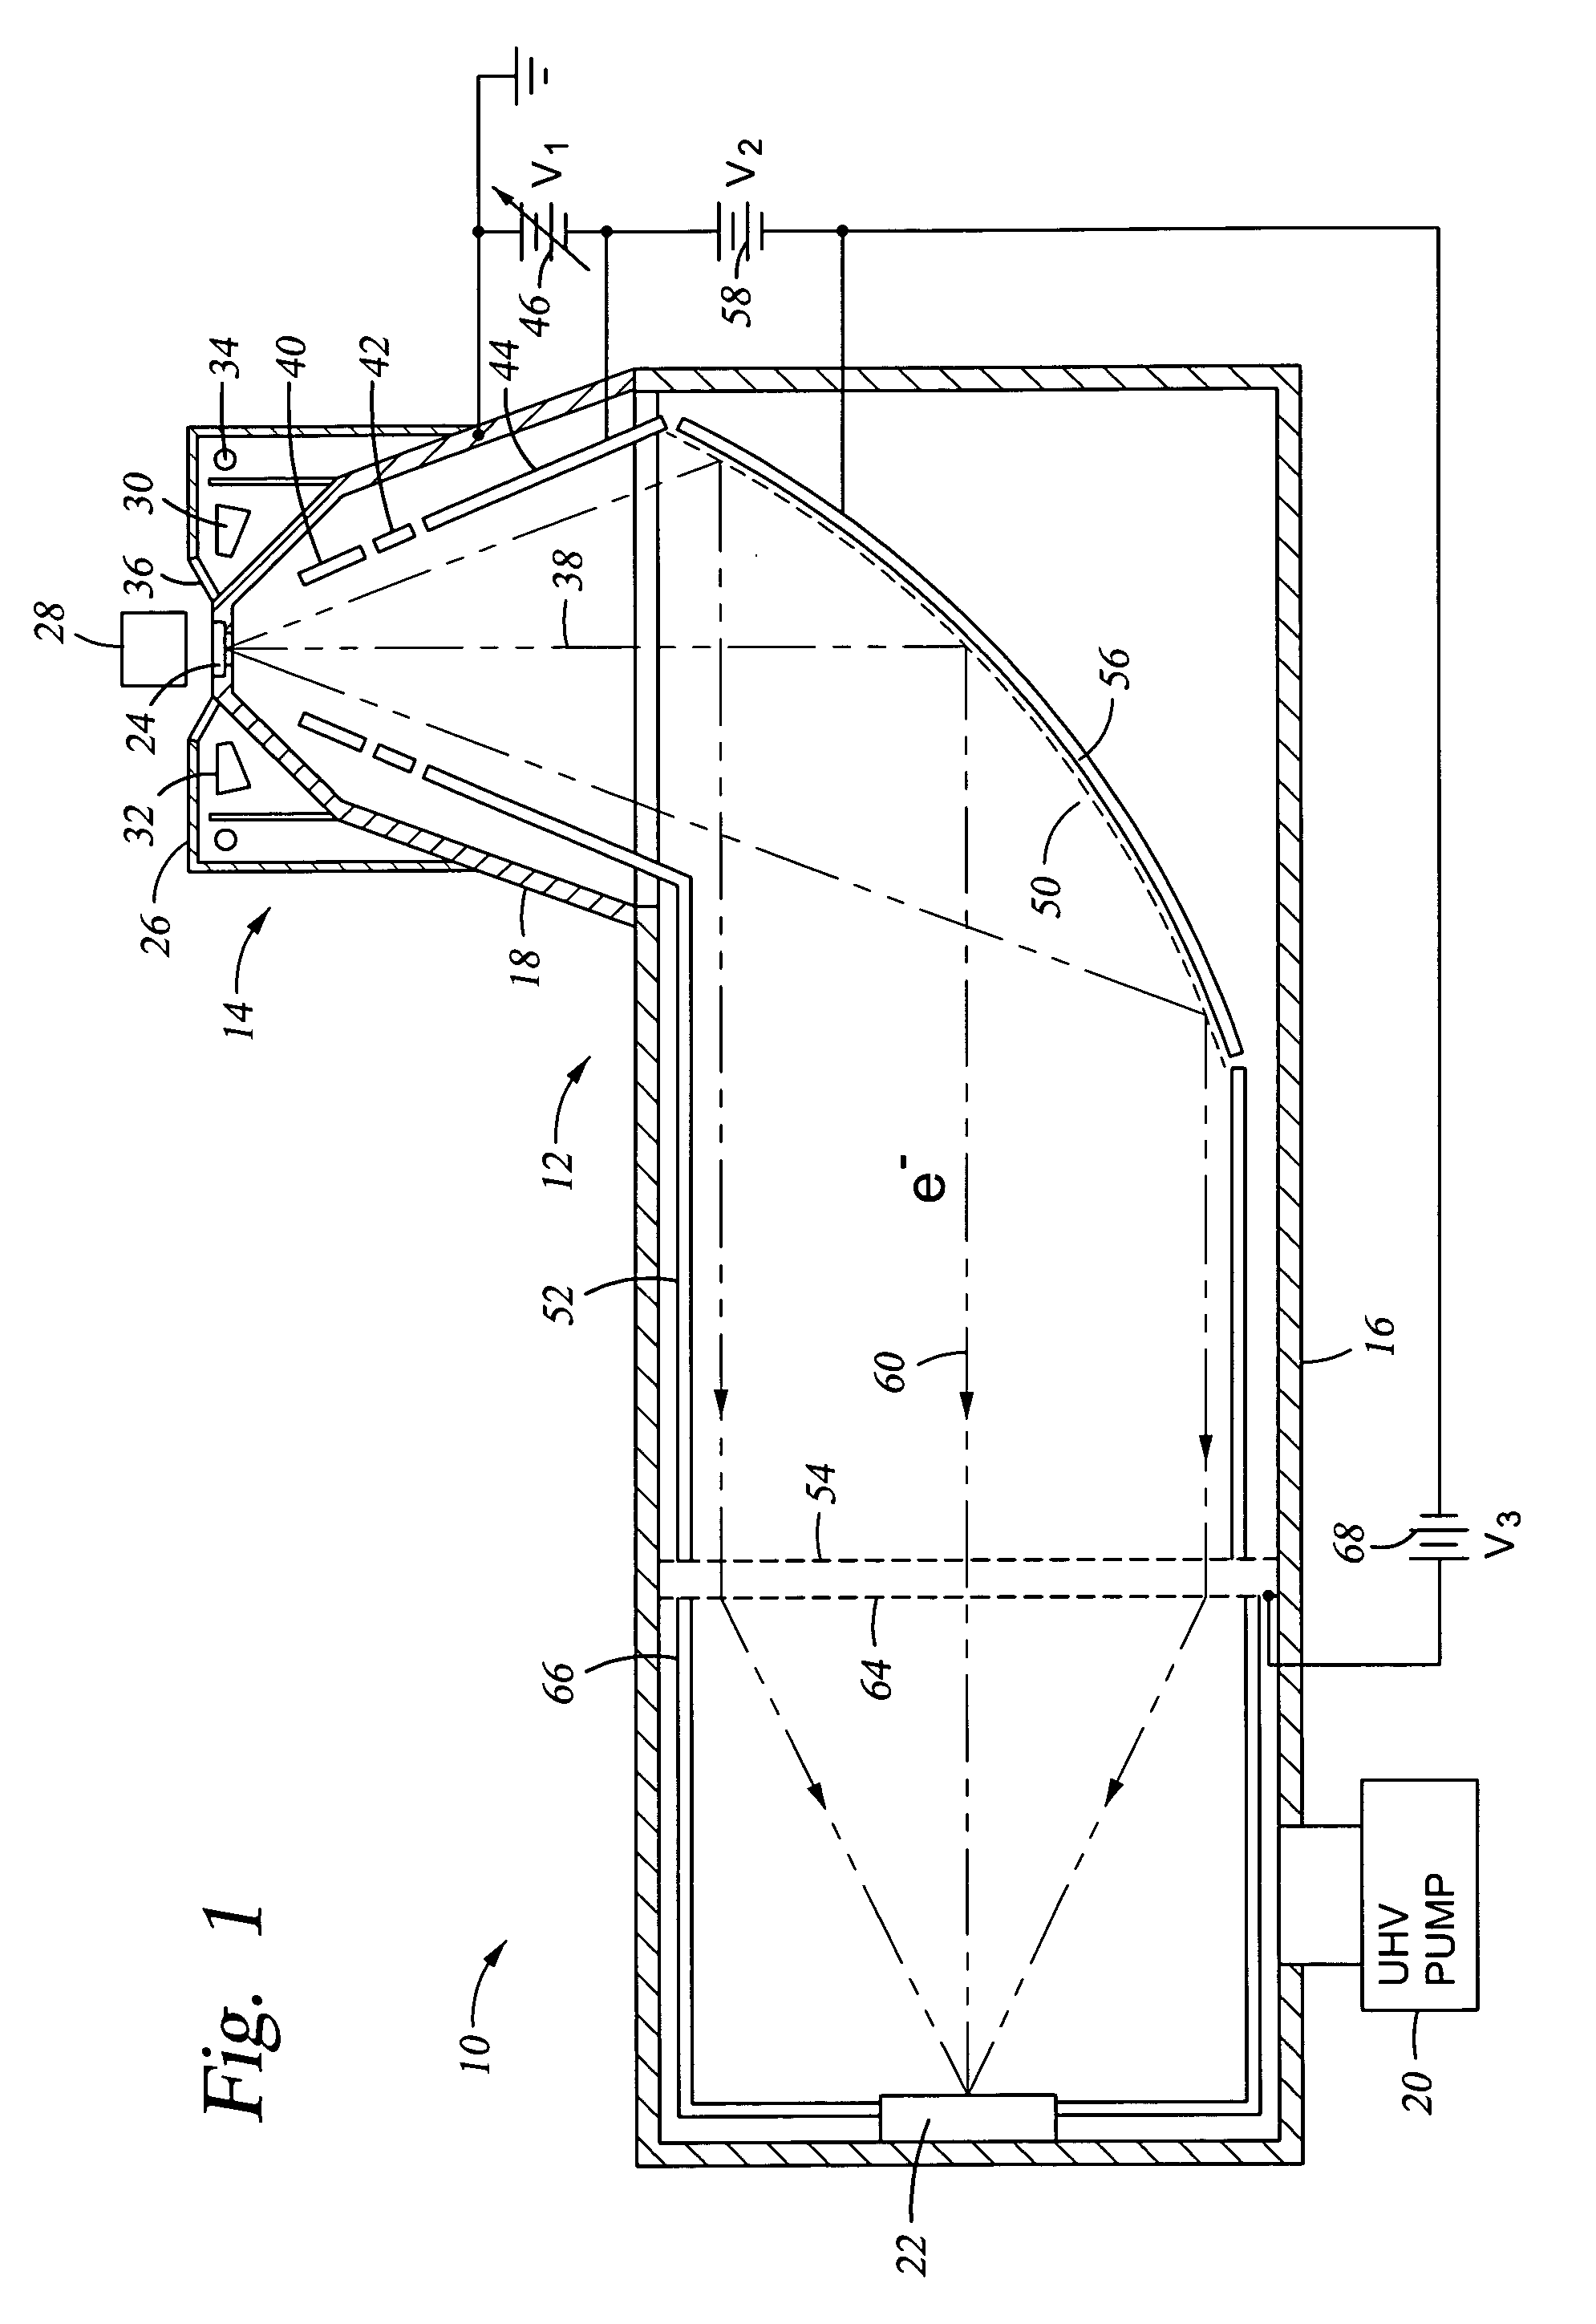 Non-dispersive charged particle energy analyzer